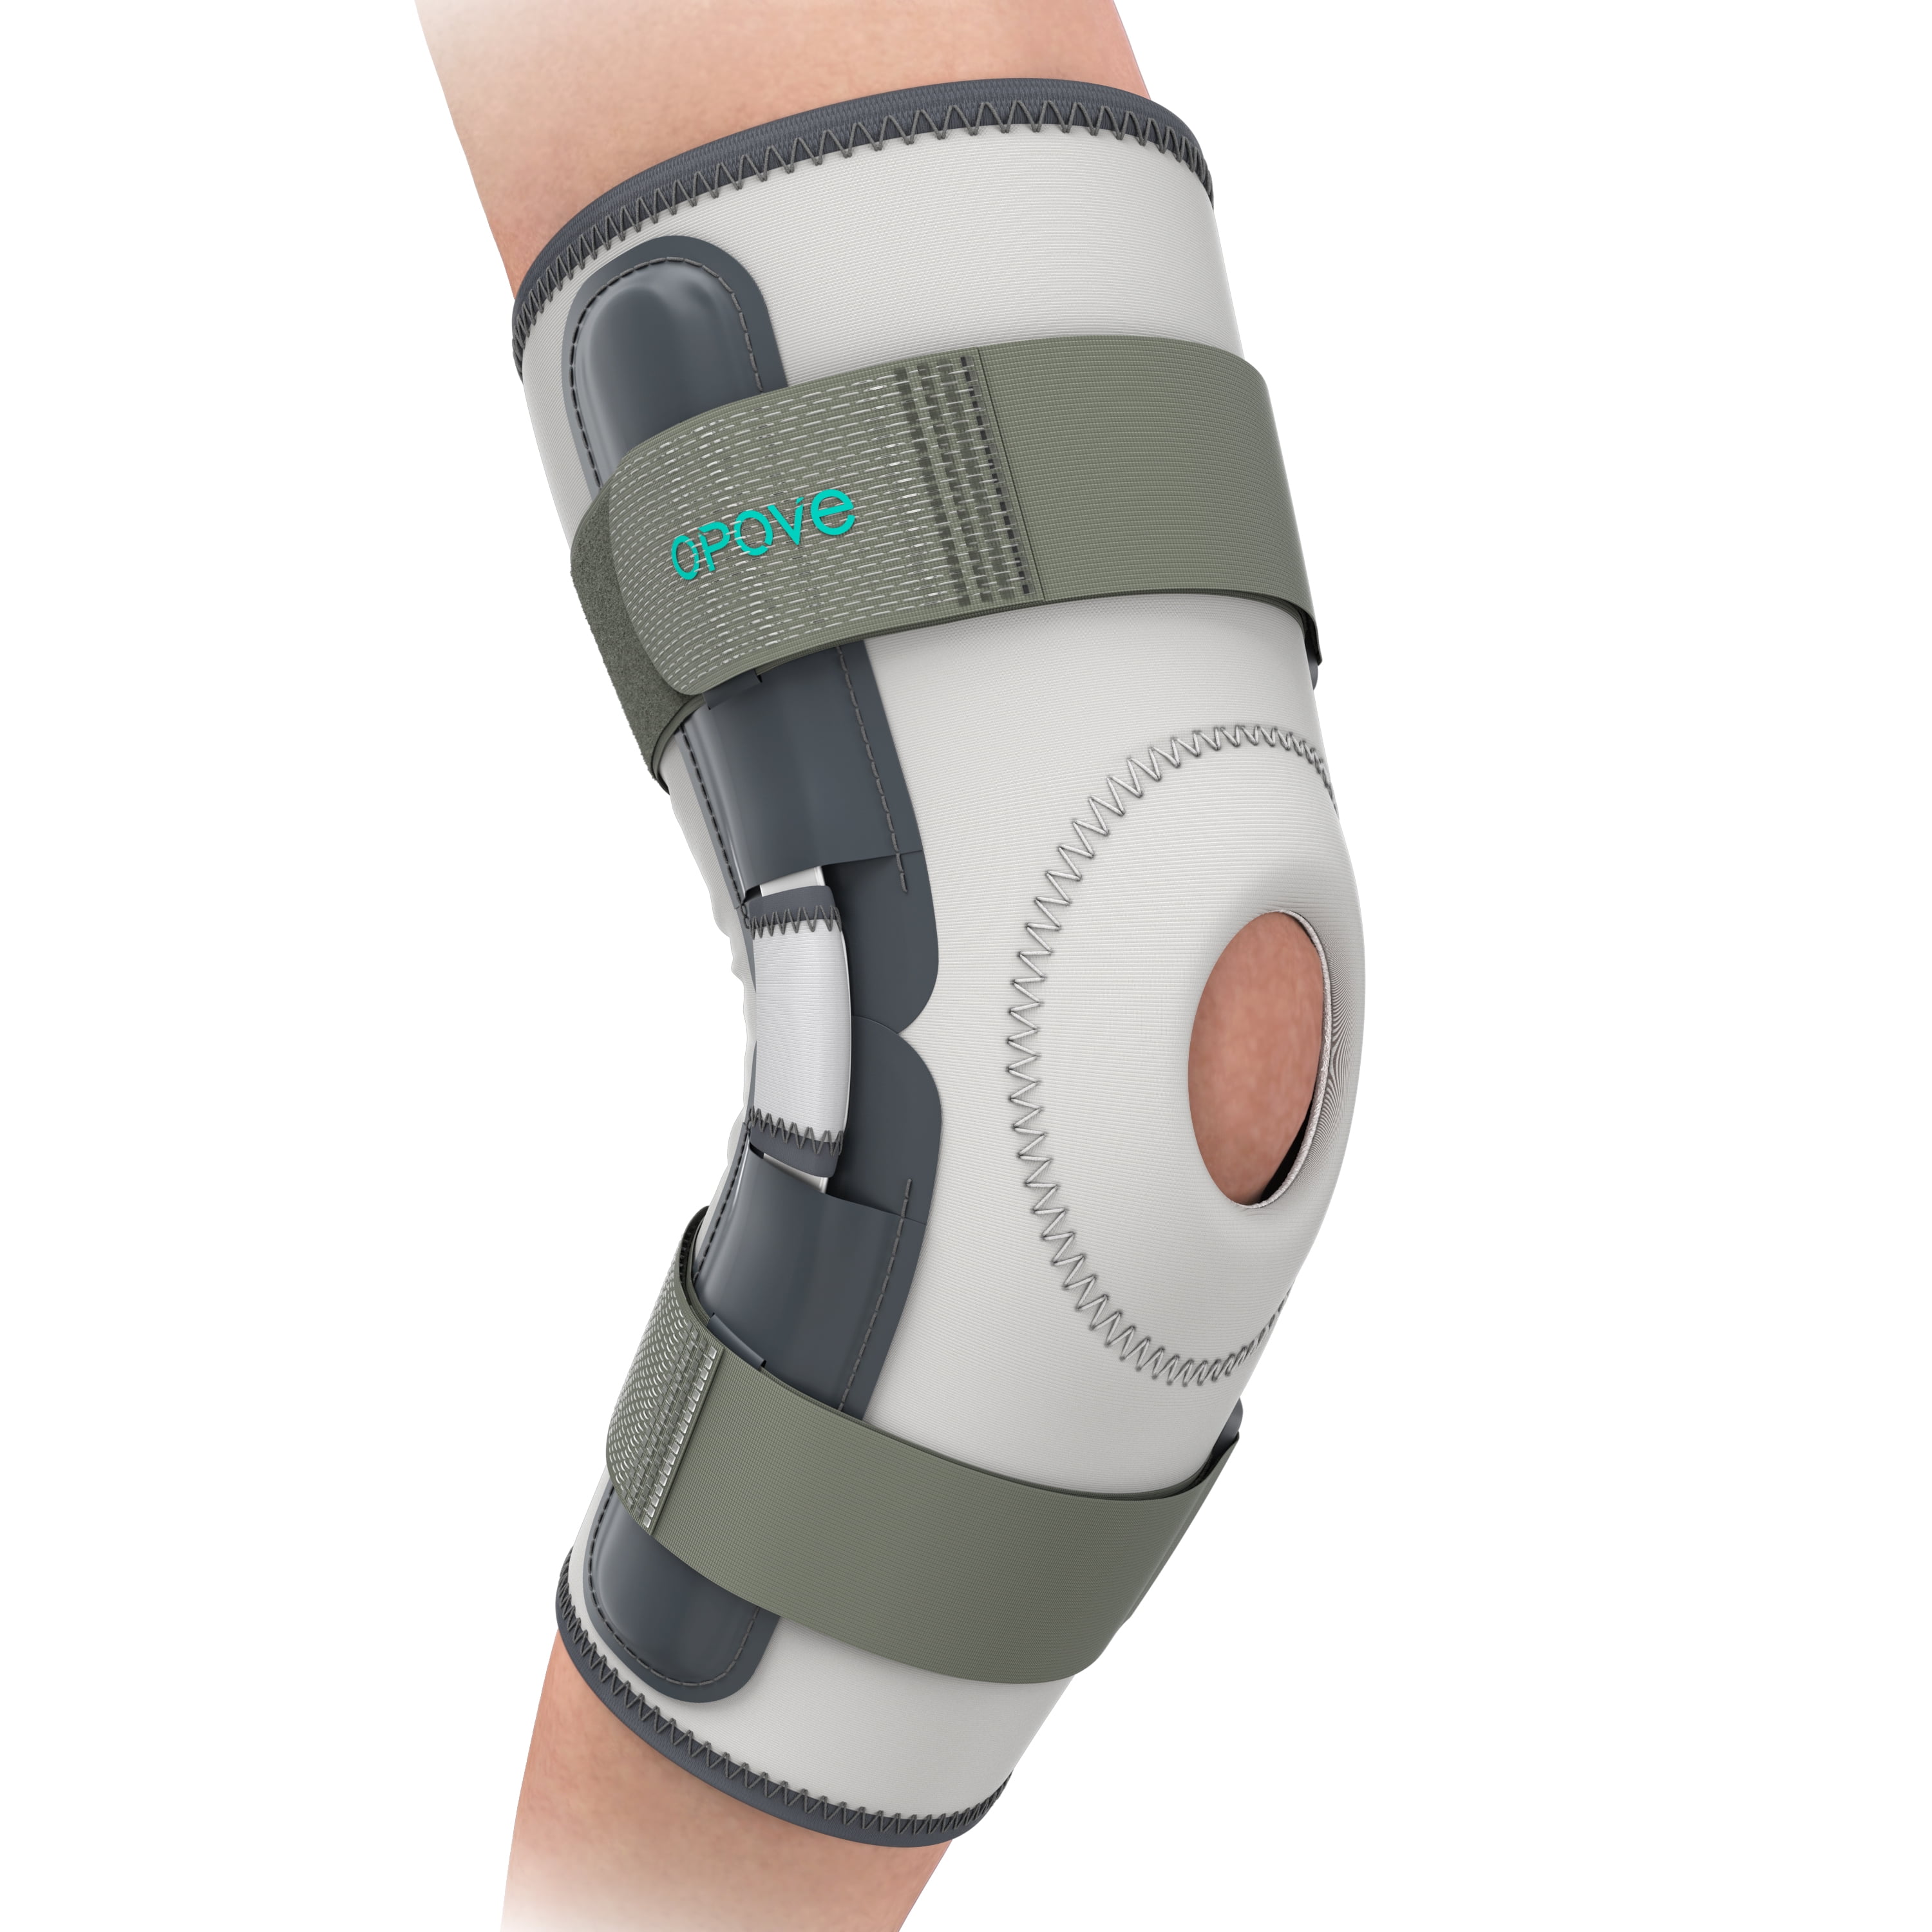 Compression Knee Brace for Meniscus Tear with Side Stabilizers,  Postoperative Support Brace for ACL/PCL Injuries, Arthritis, Tendonitis,  Patella Pain